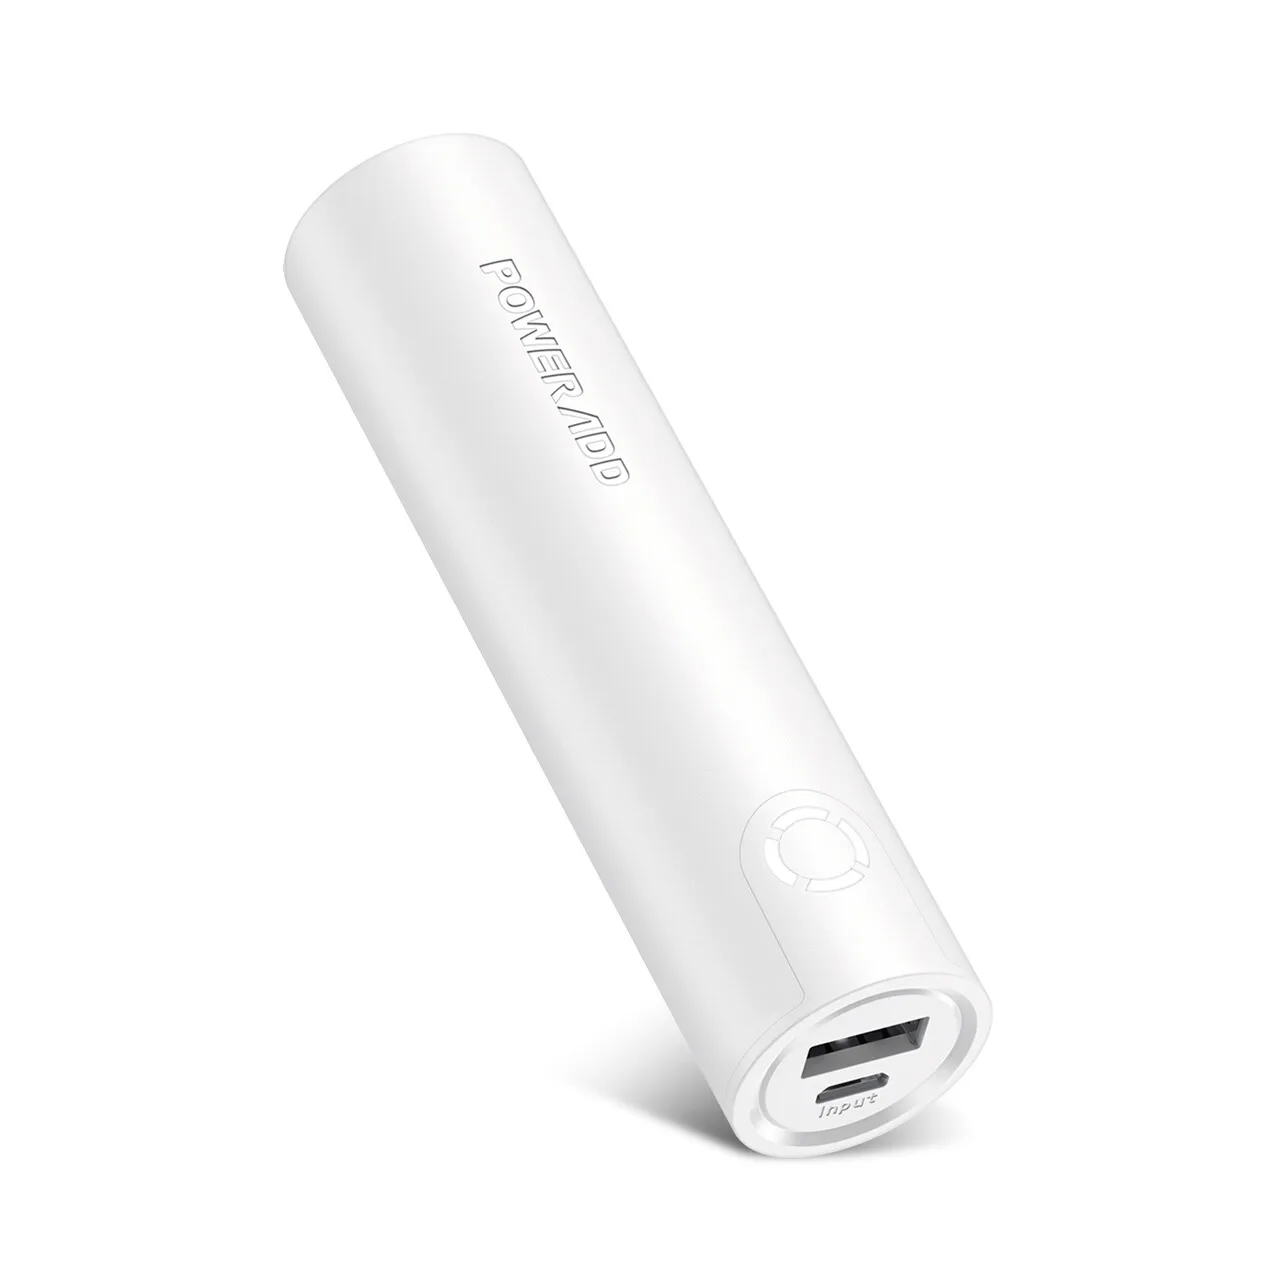 Poweradd New EnergyCell Portable Mobile Charger Light New Color Power Bank 5000mah With 2.4A Output Fast Charging